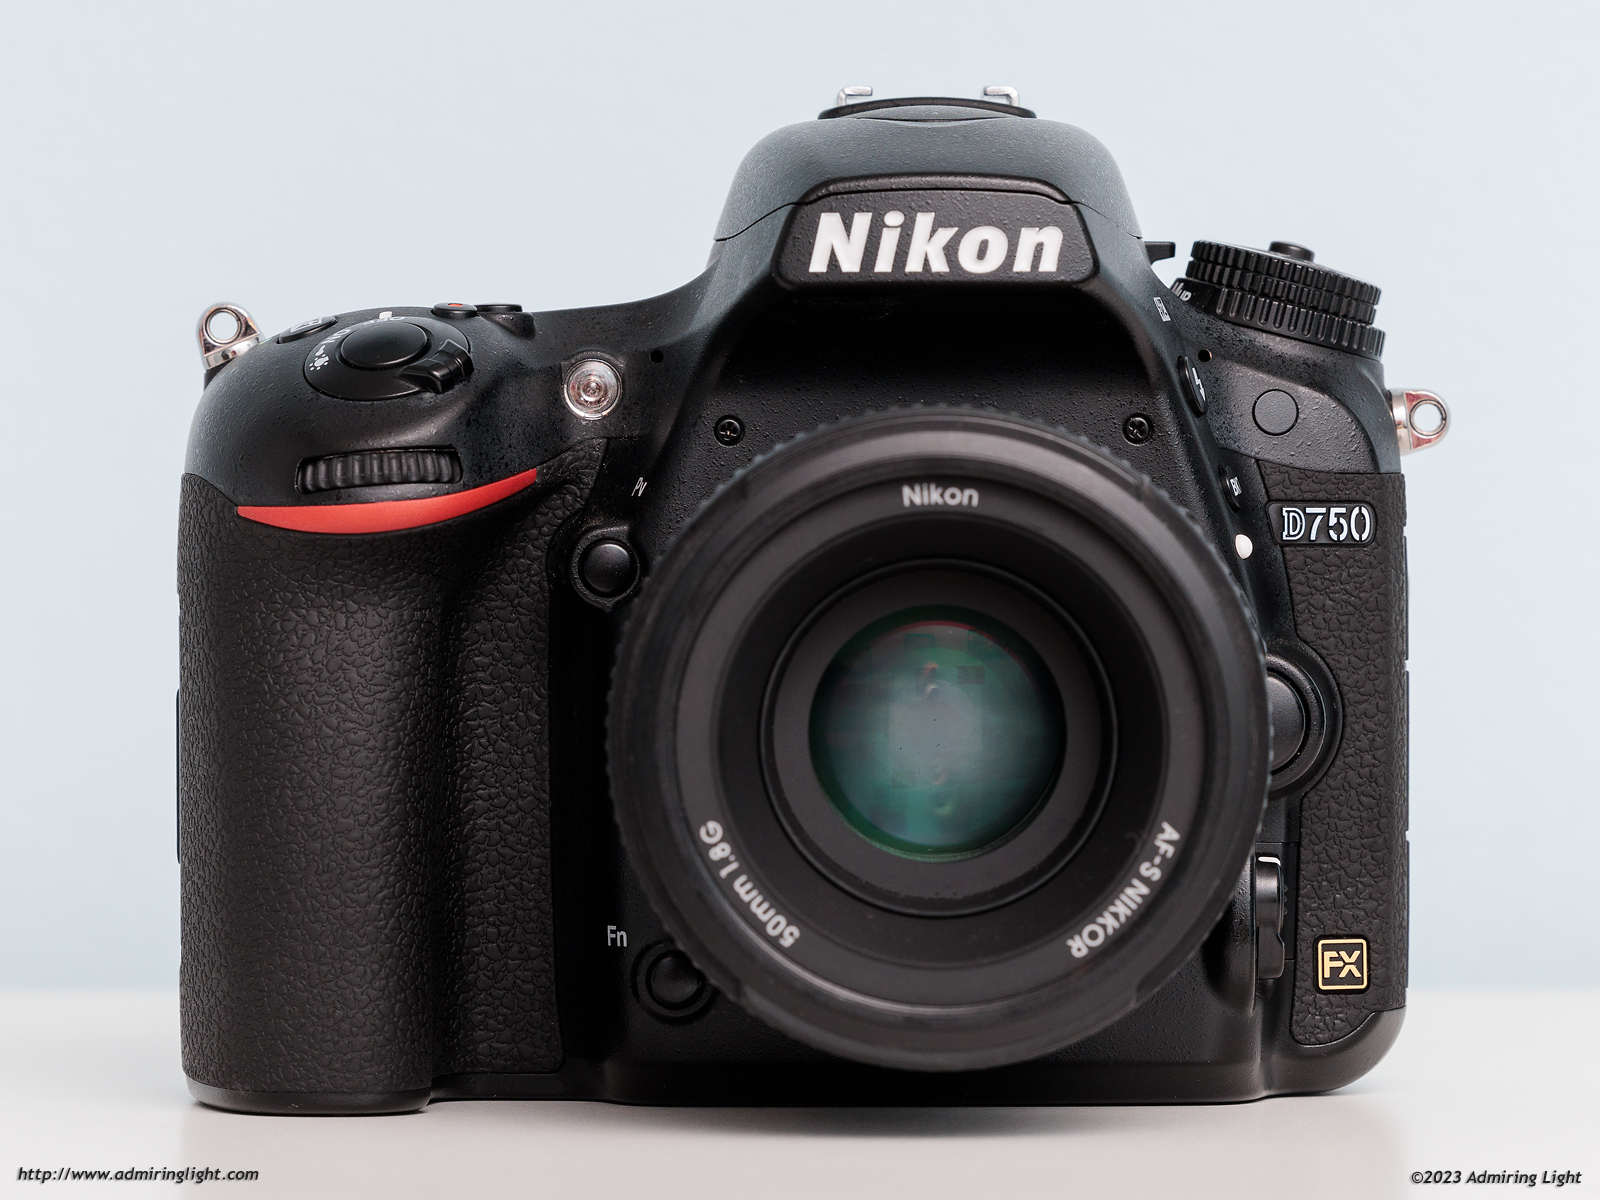 Revisiting the DSLR - Is Mirrorless Really Better? - Admiring Light